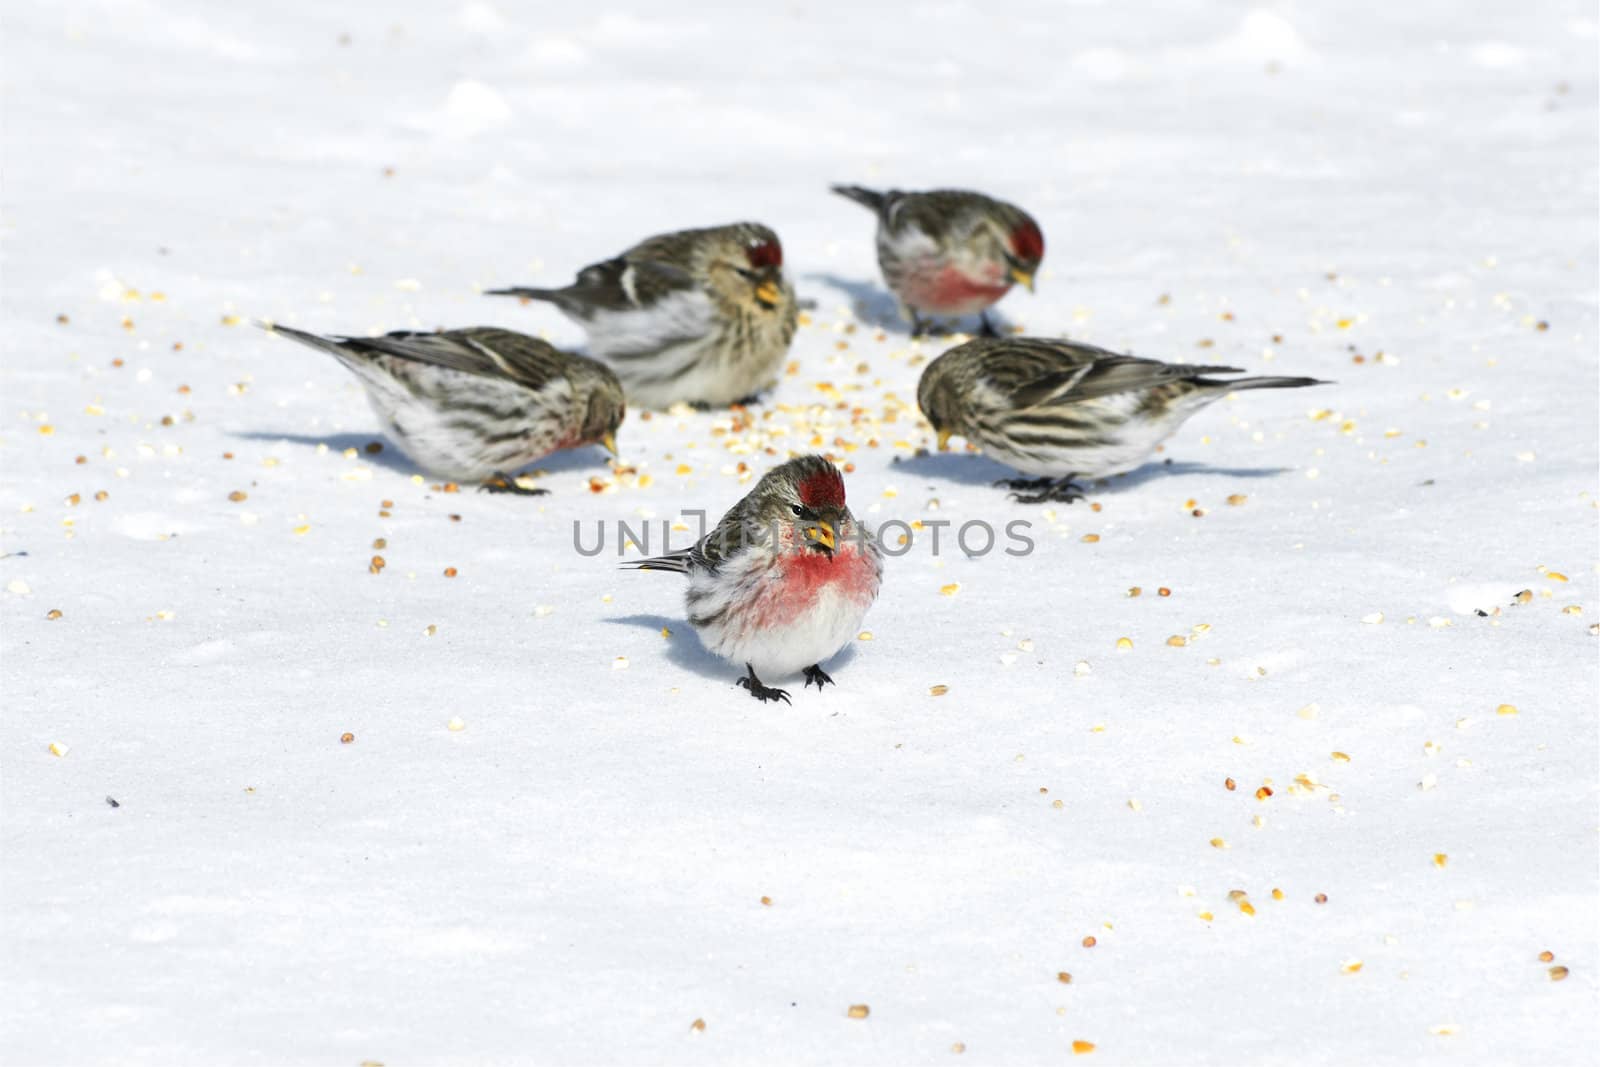 Birds eating seeds on snow by Mirage3